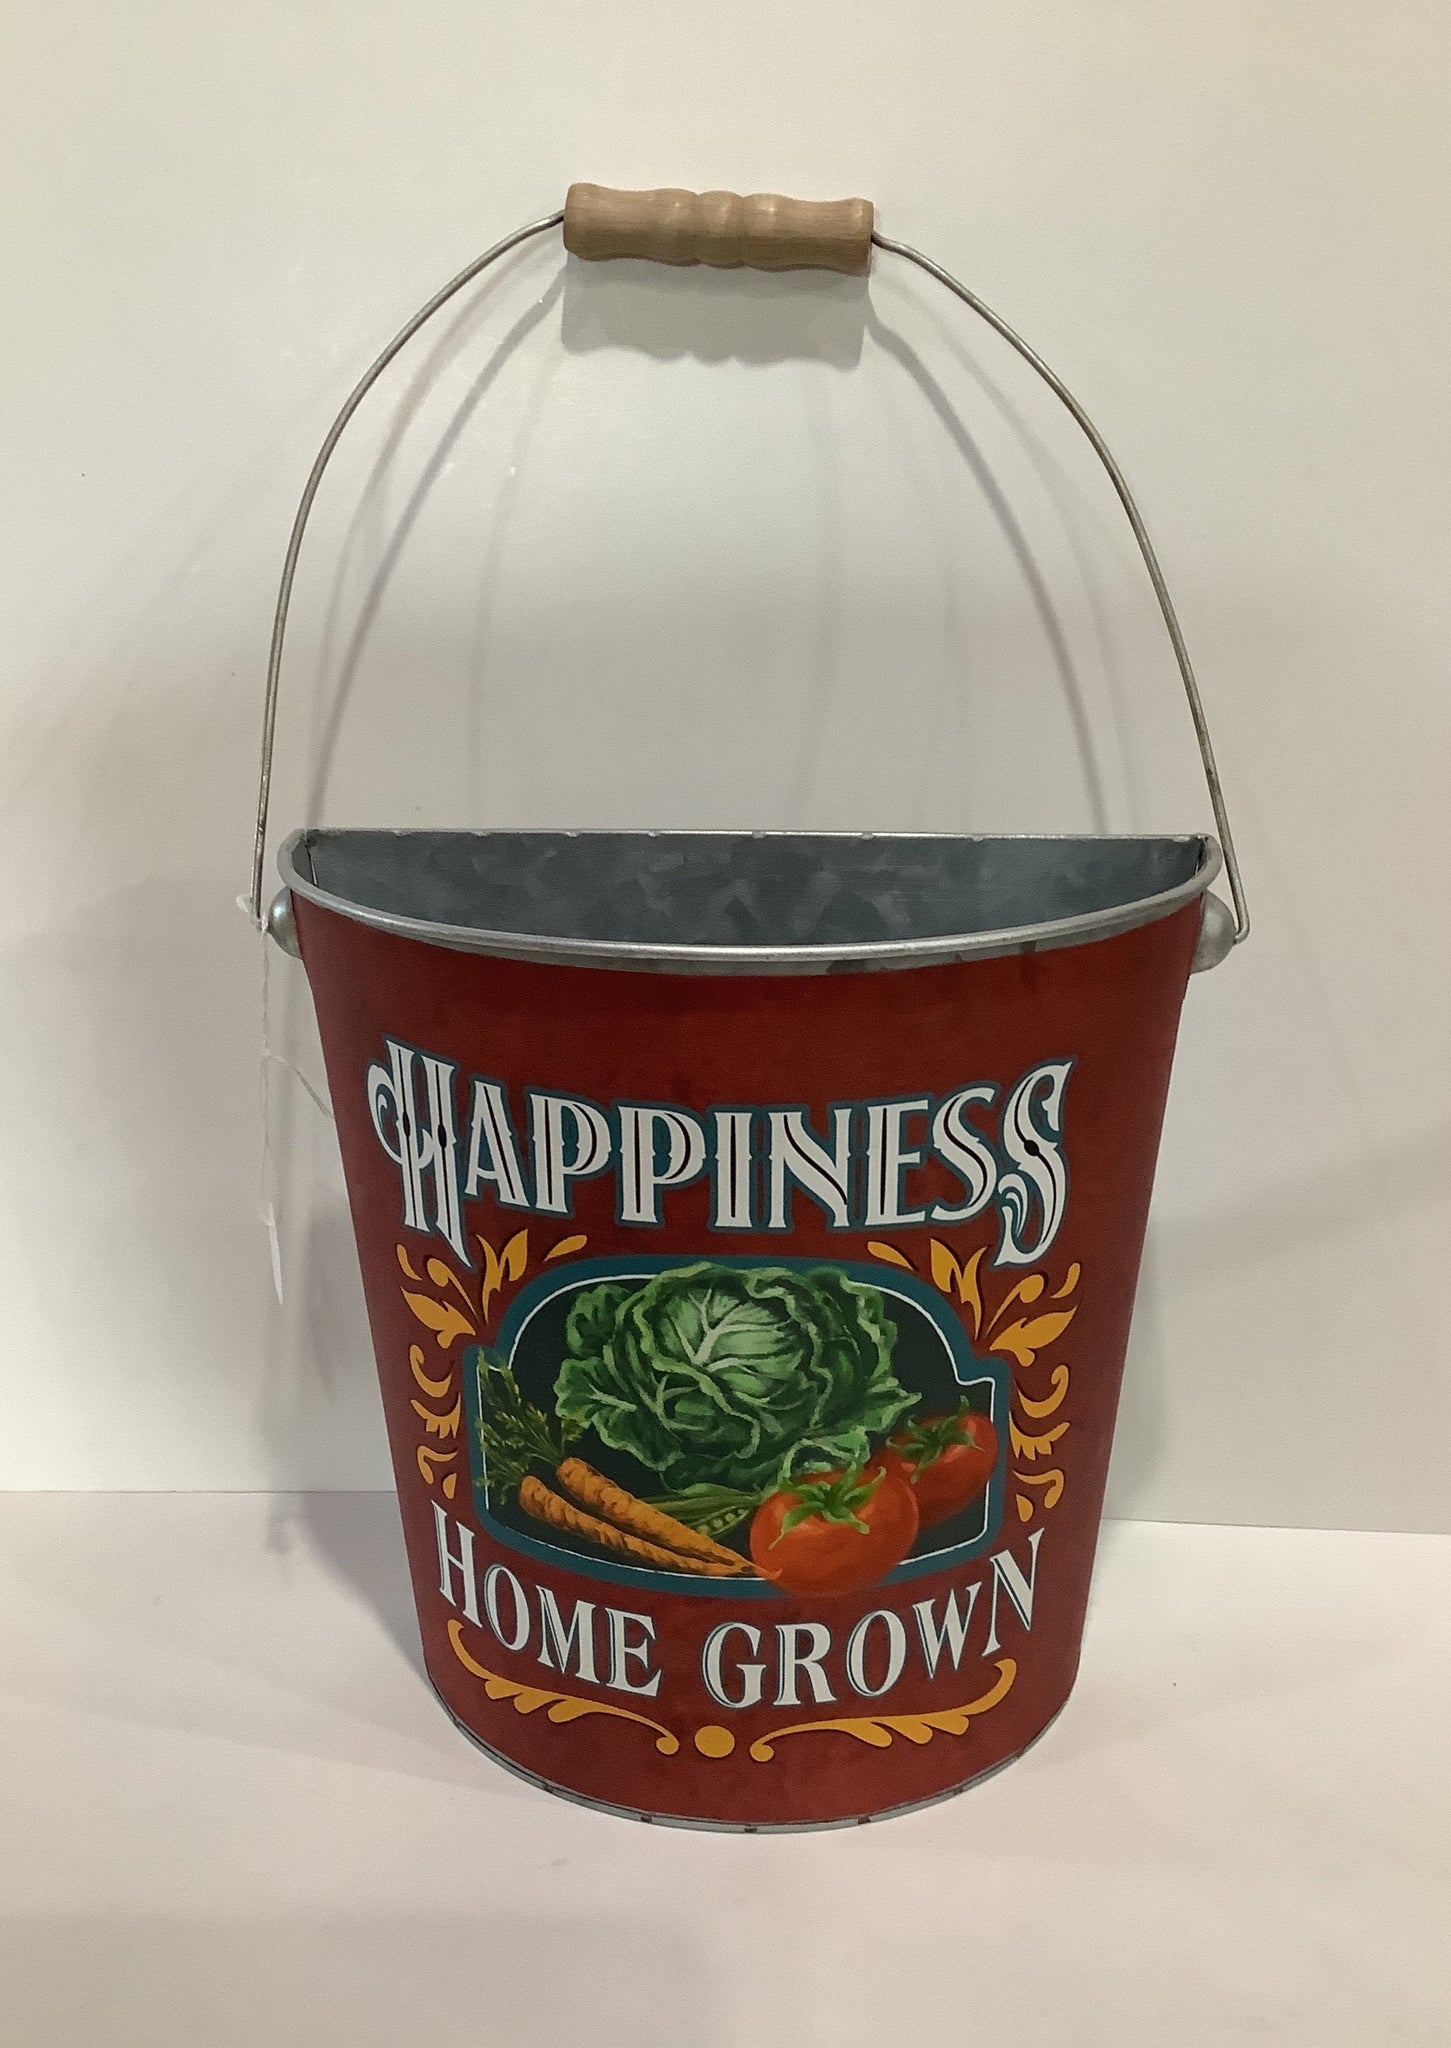 Happiness home grown planter